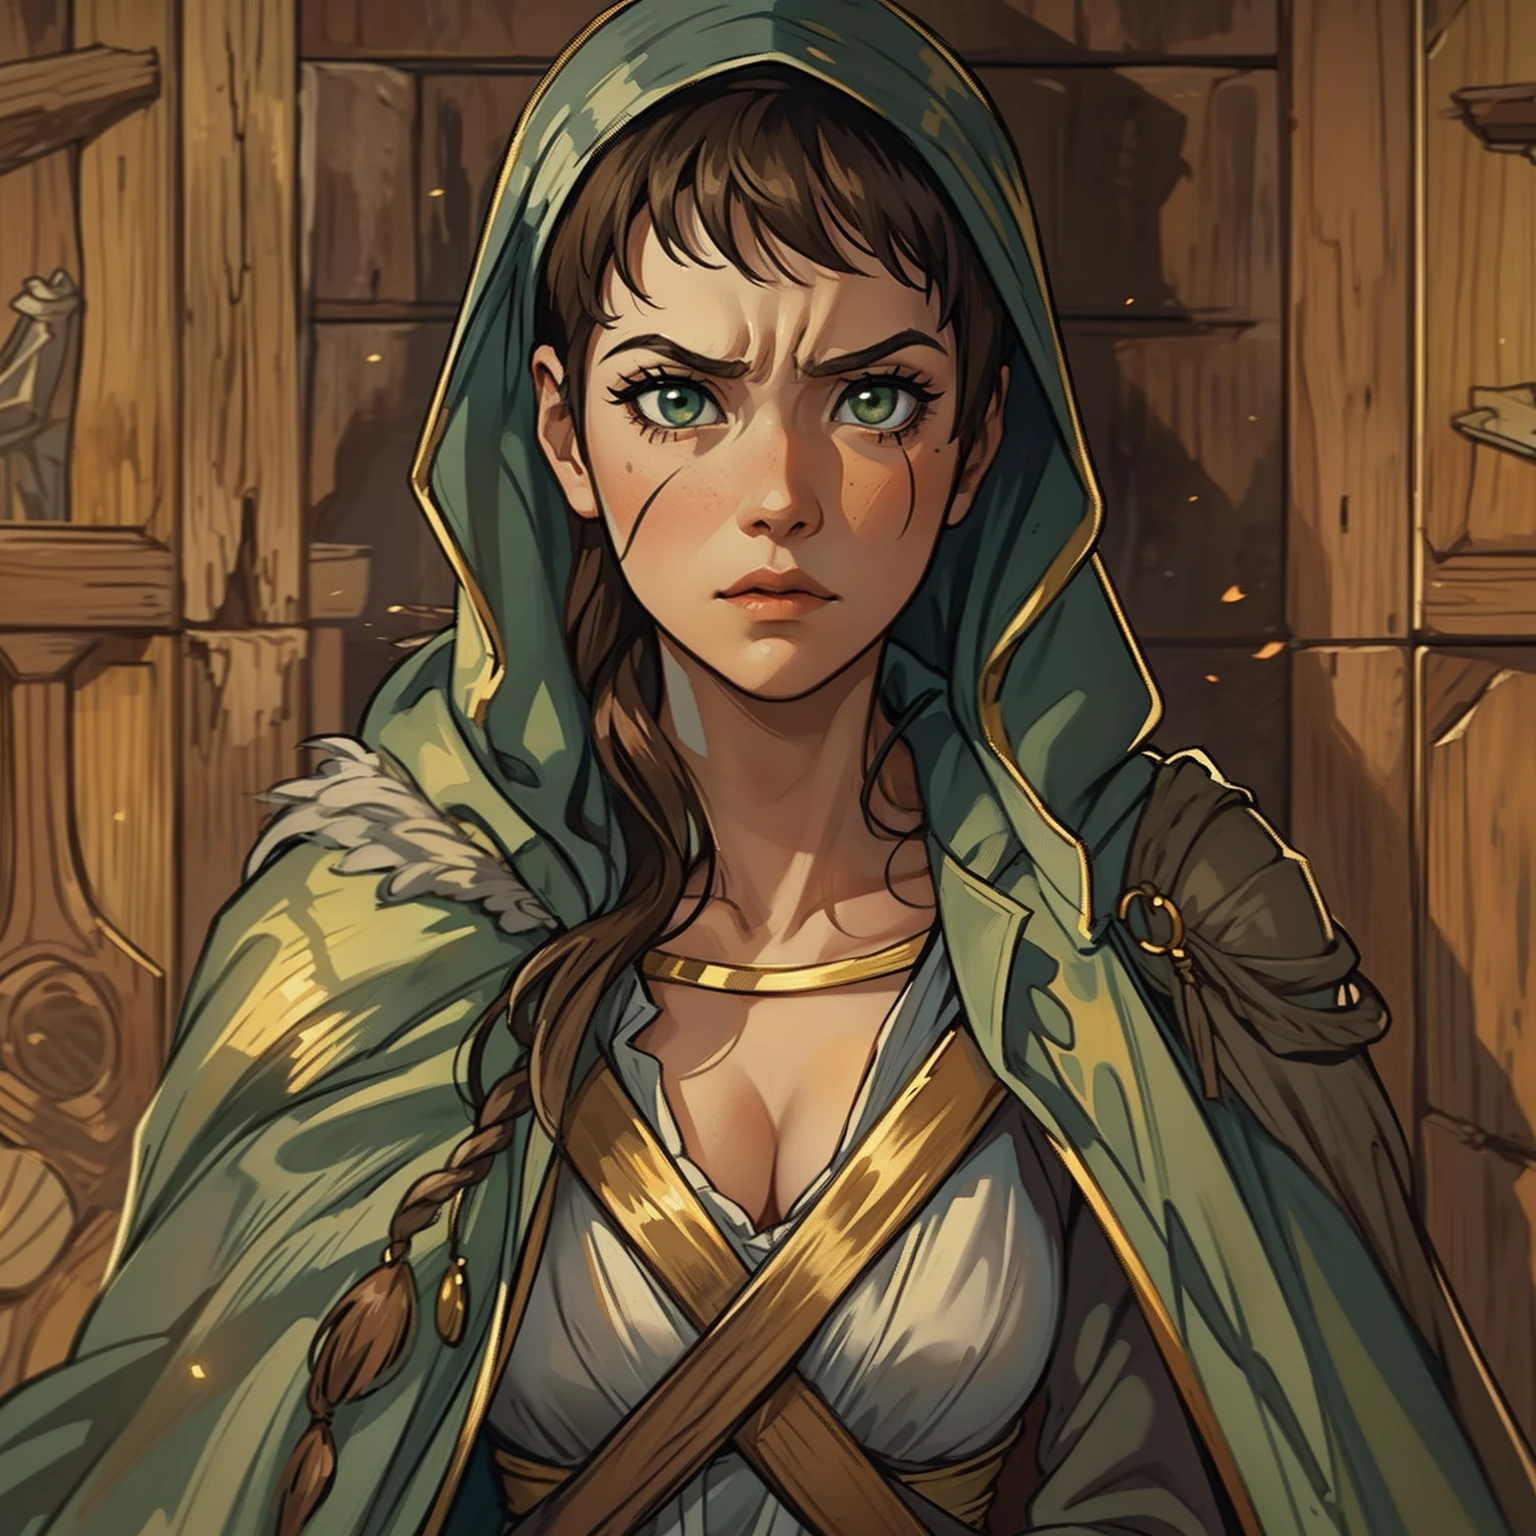 A beautiful woman with green eyes and brown hair is a sorceress Wizard dressed in white and gold robes Noble robes A princess of magic and a tired look ((gritando furiosa)), is rubber. ((Enrojecida)) dramatic wooden wallpaper An art for an RPG A medieval art for an RPG